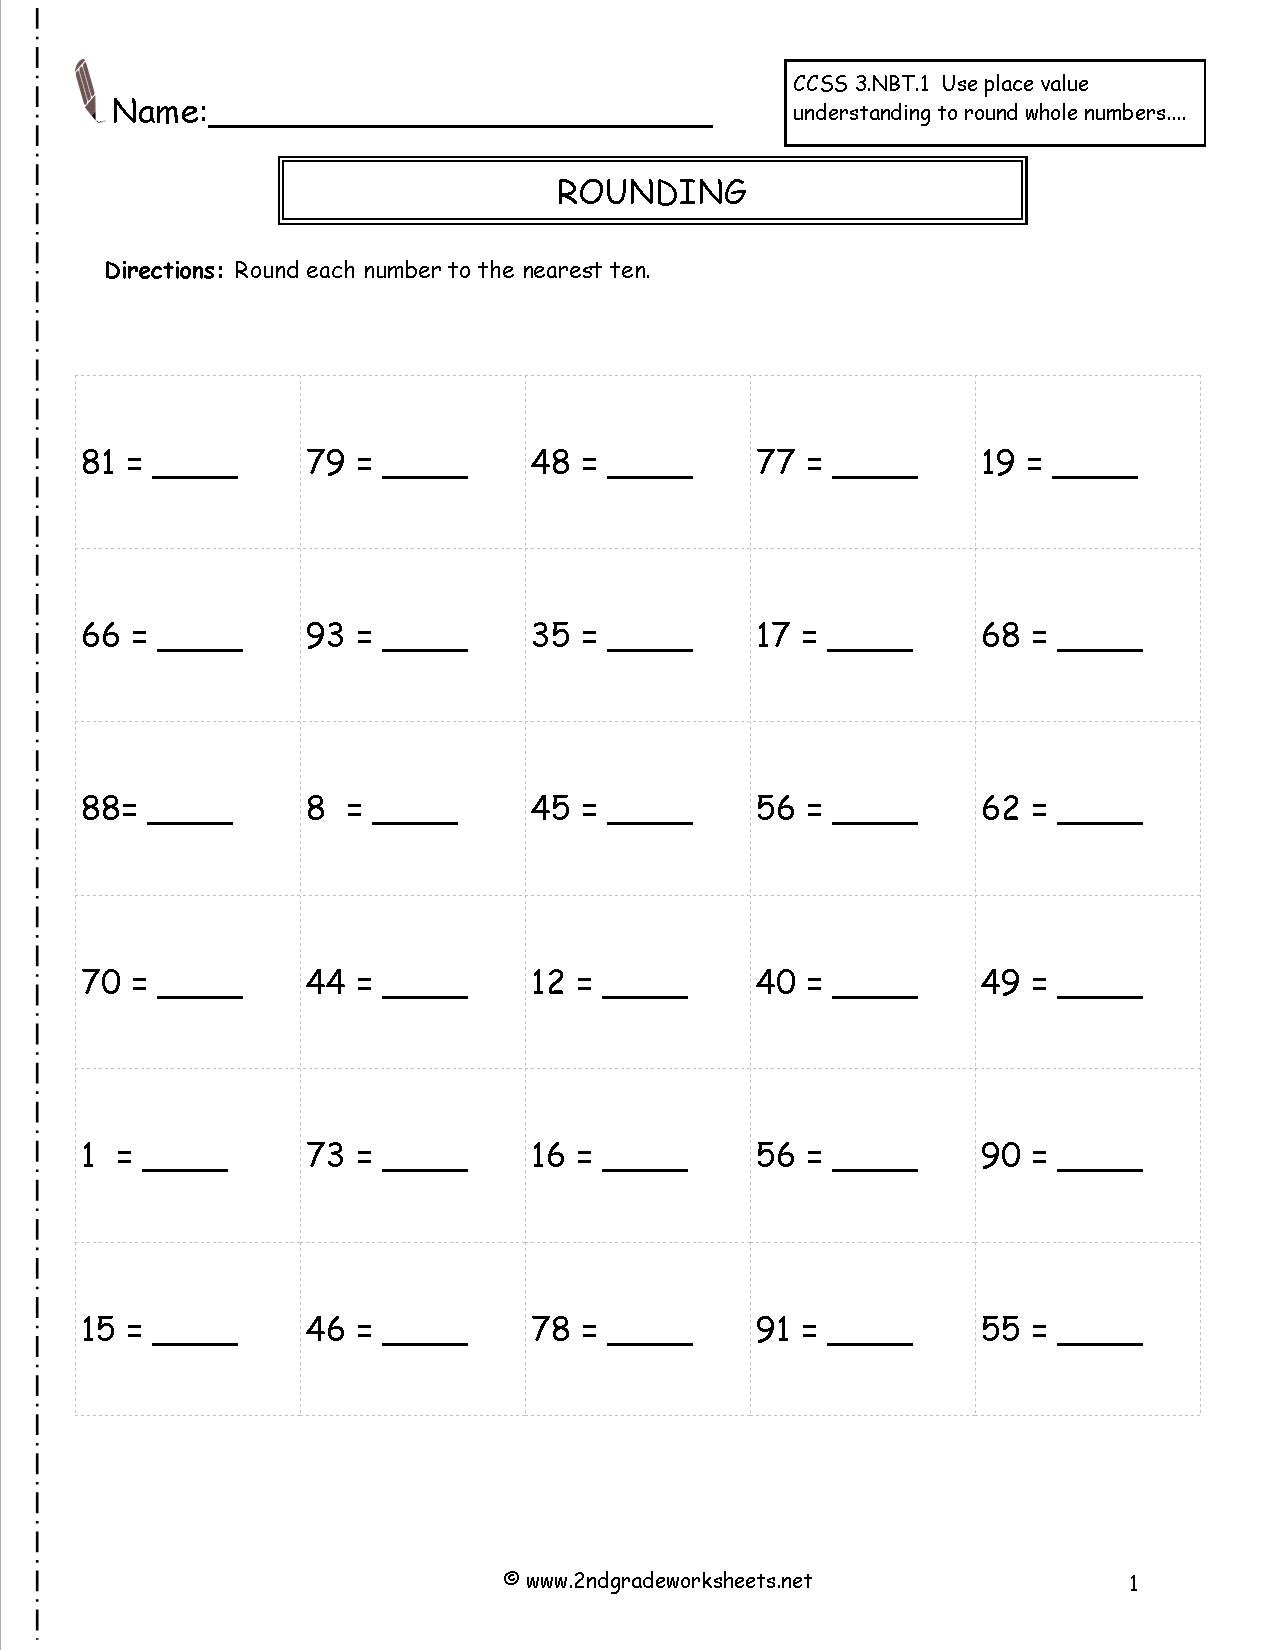 rounding-whole-numbers-worksheets-for-estimating-sums-and-differences-worksheets-excelguider